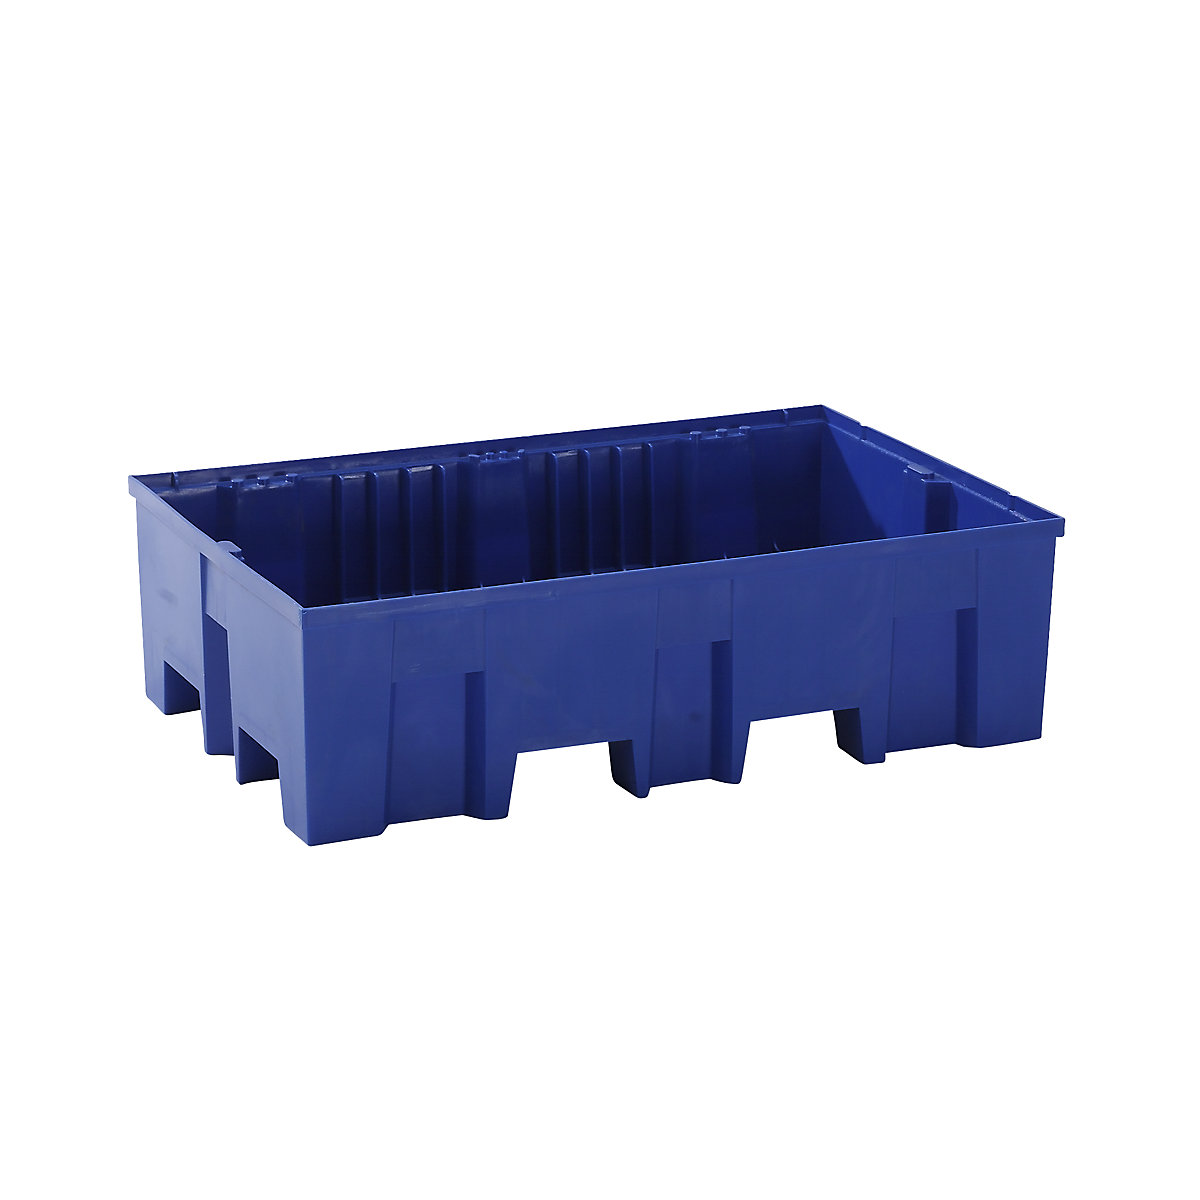 PE sump tray for 2 x 200 litre drums